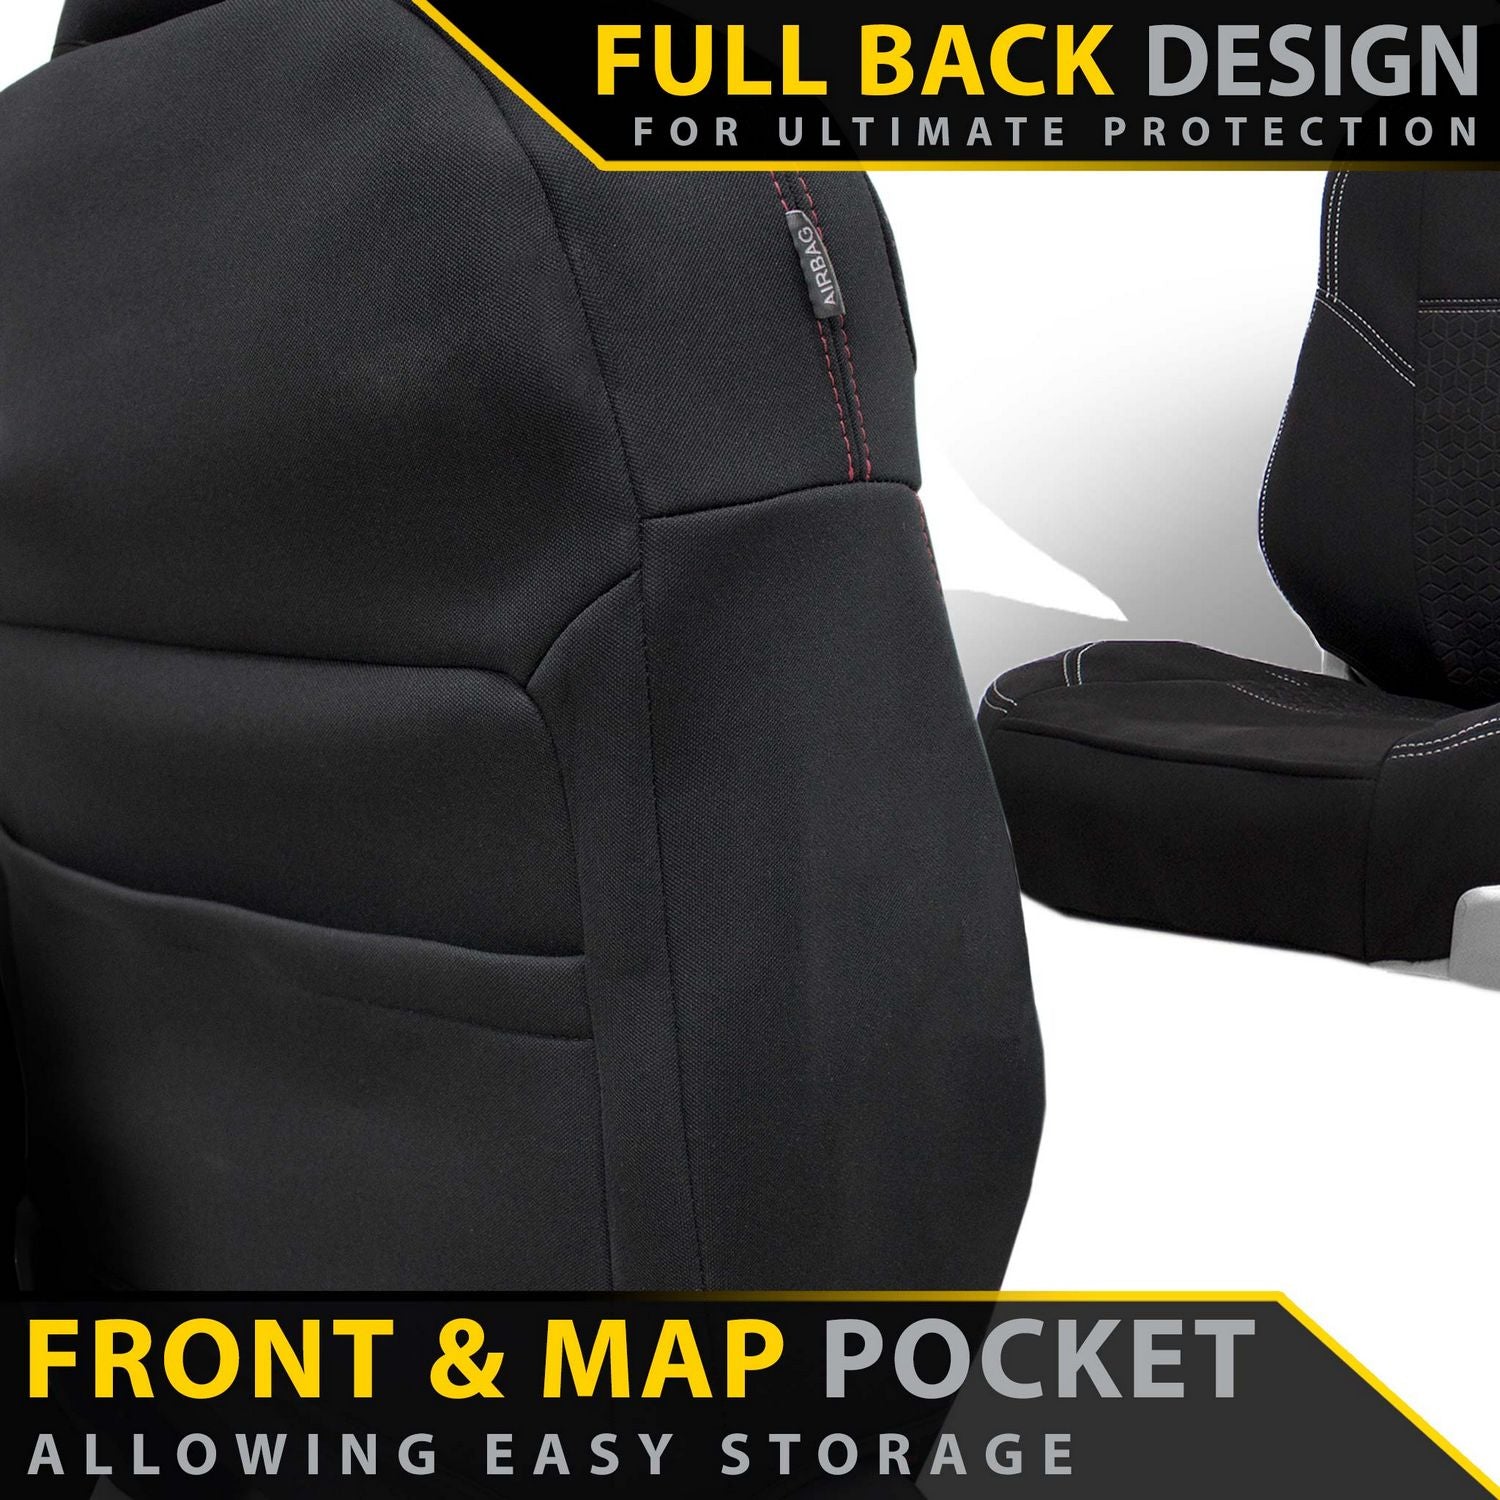 Toyota Landcruiser 300 Series VX Premium Neoprene 2x Front Row Seat Covers (Made to Order)